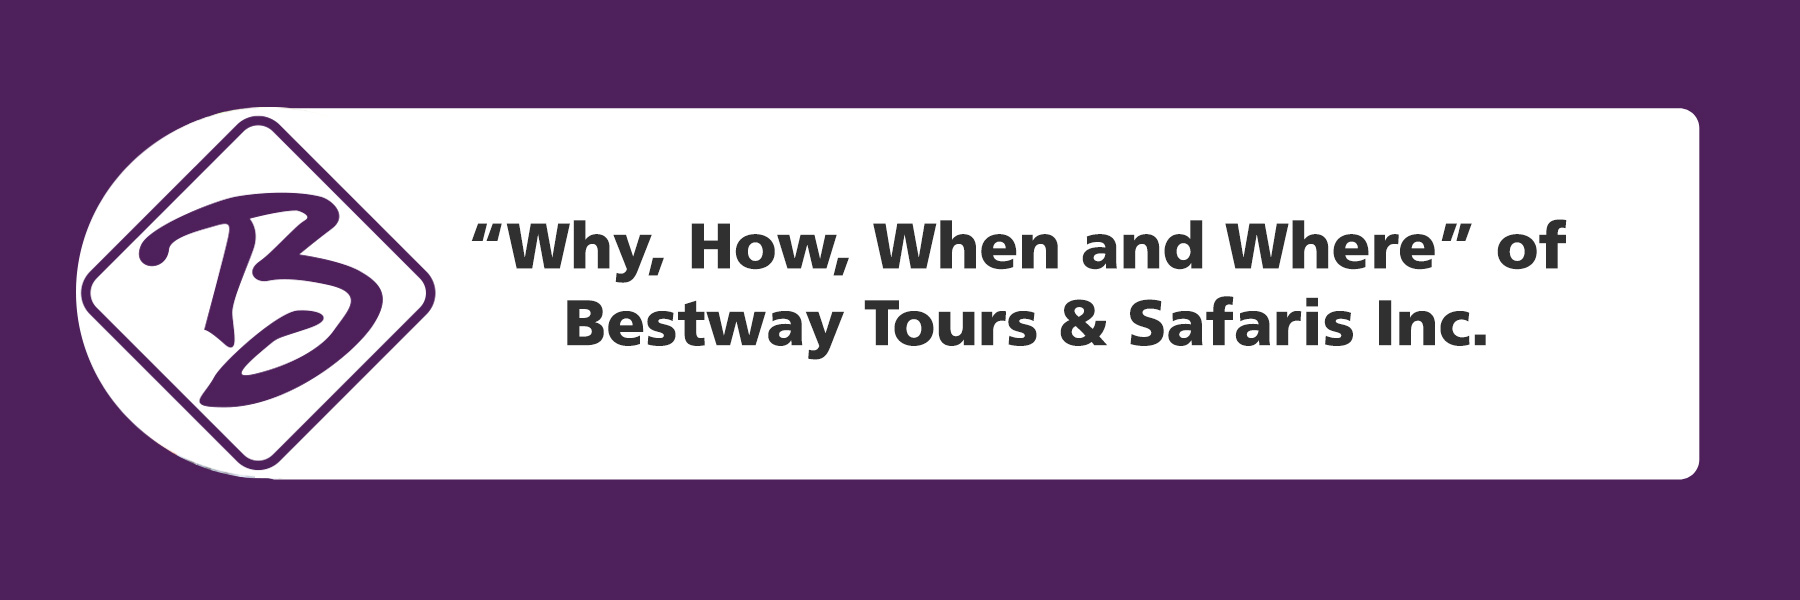 >Why, How, When and Where of Bestway Tours & Safari Inc.